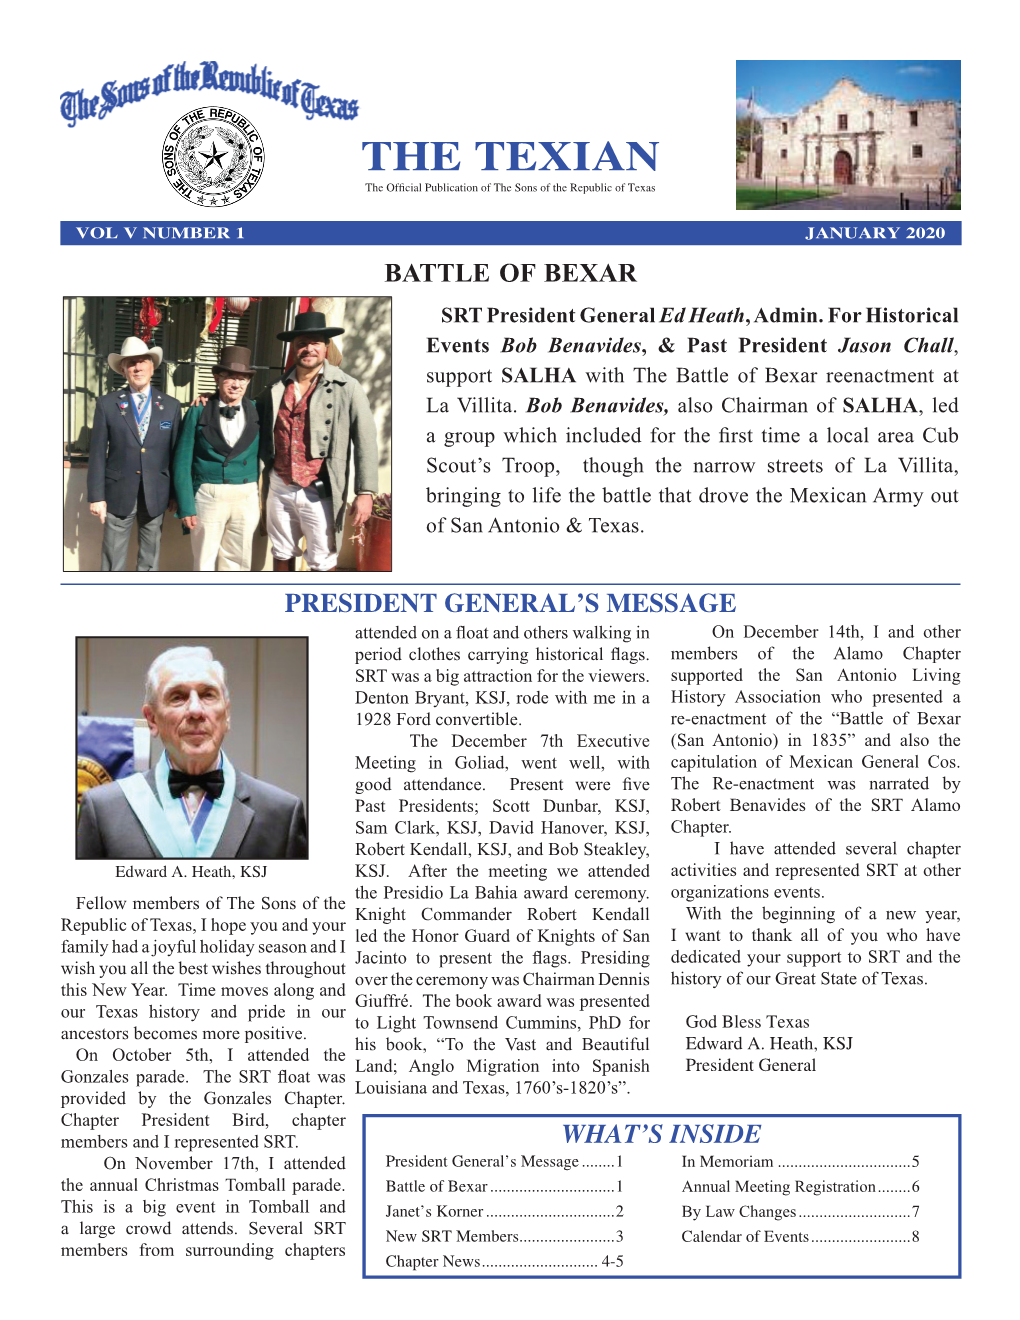 The Texian the Official Publication of the Sons of the Republic of Texas